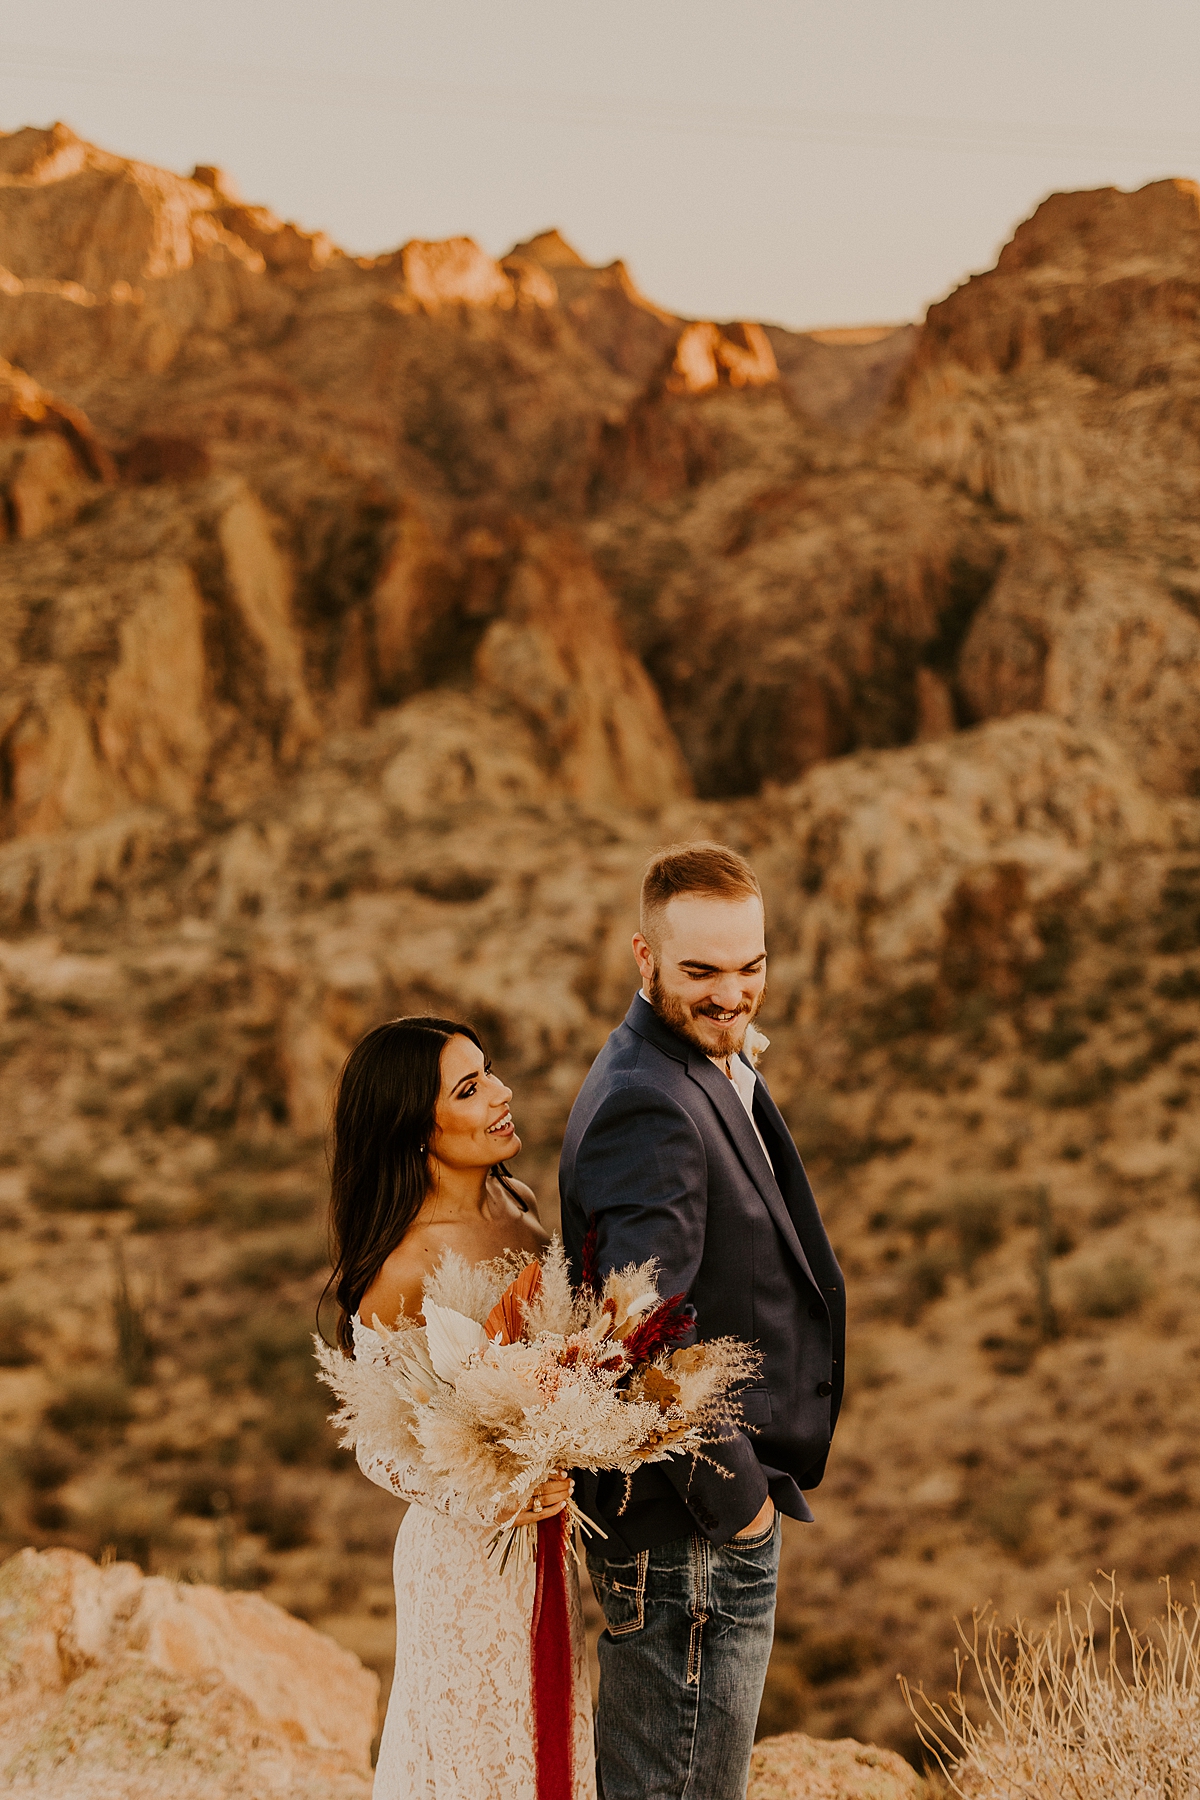 Intimate-elopement-in-superstition-mountain-wilderness-allison-slater-photography75.jpg